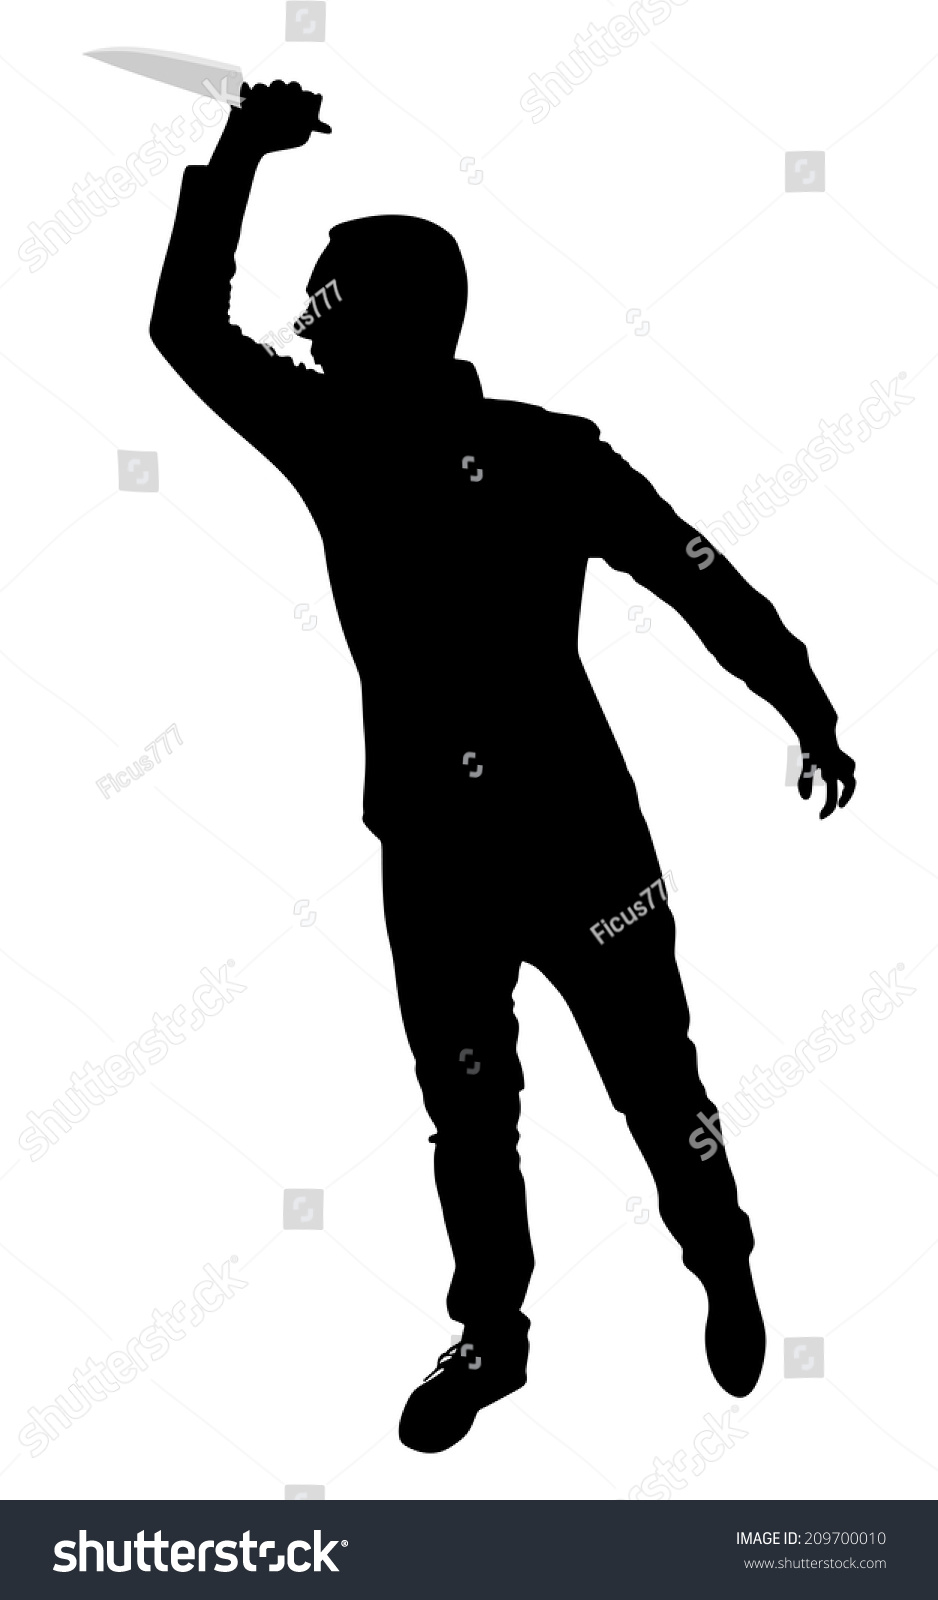 Horror Silhouette Of Man With Knife Stock Vector Illustration 209700010